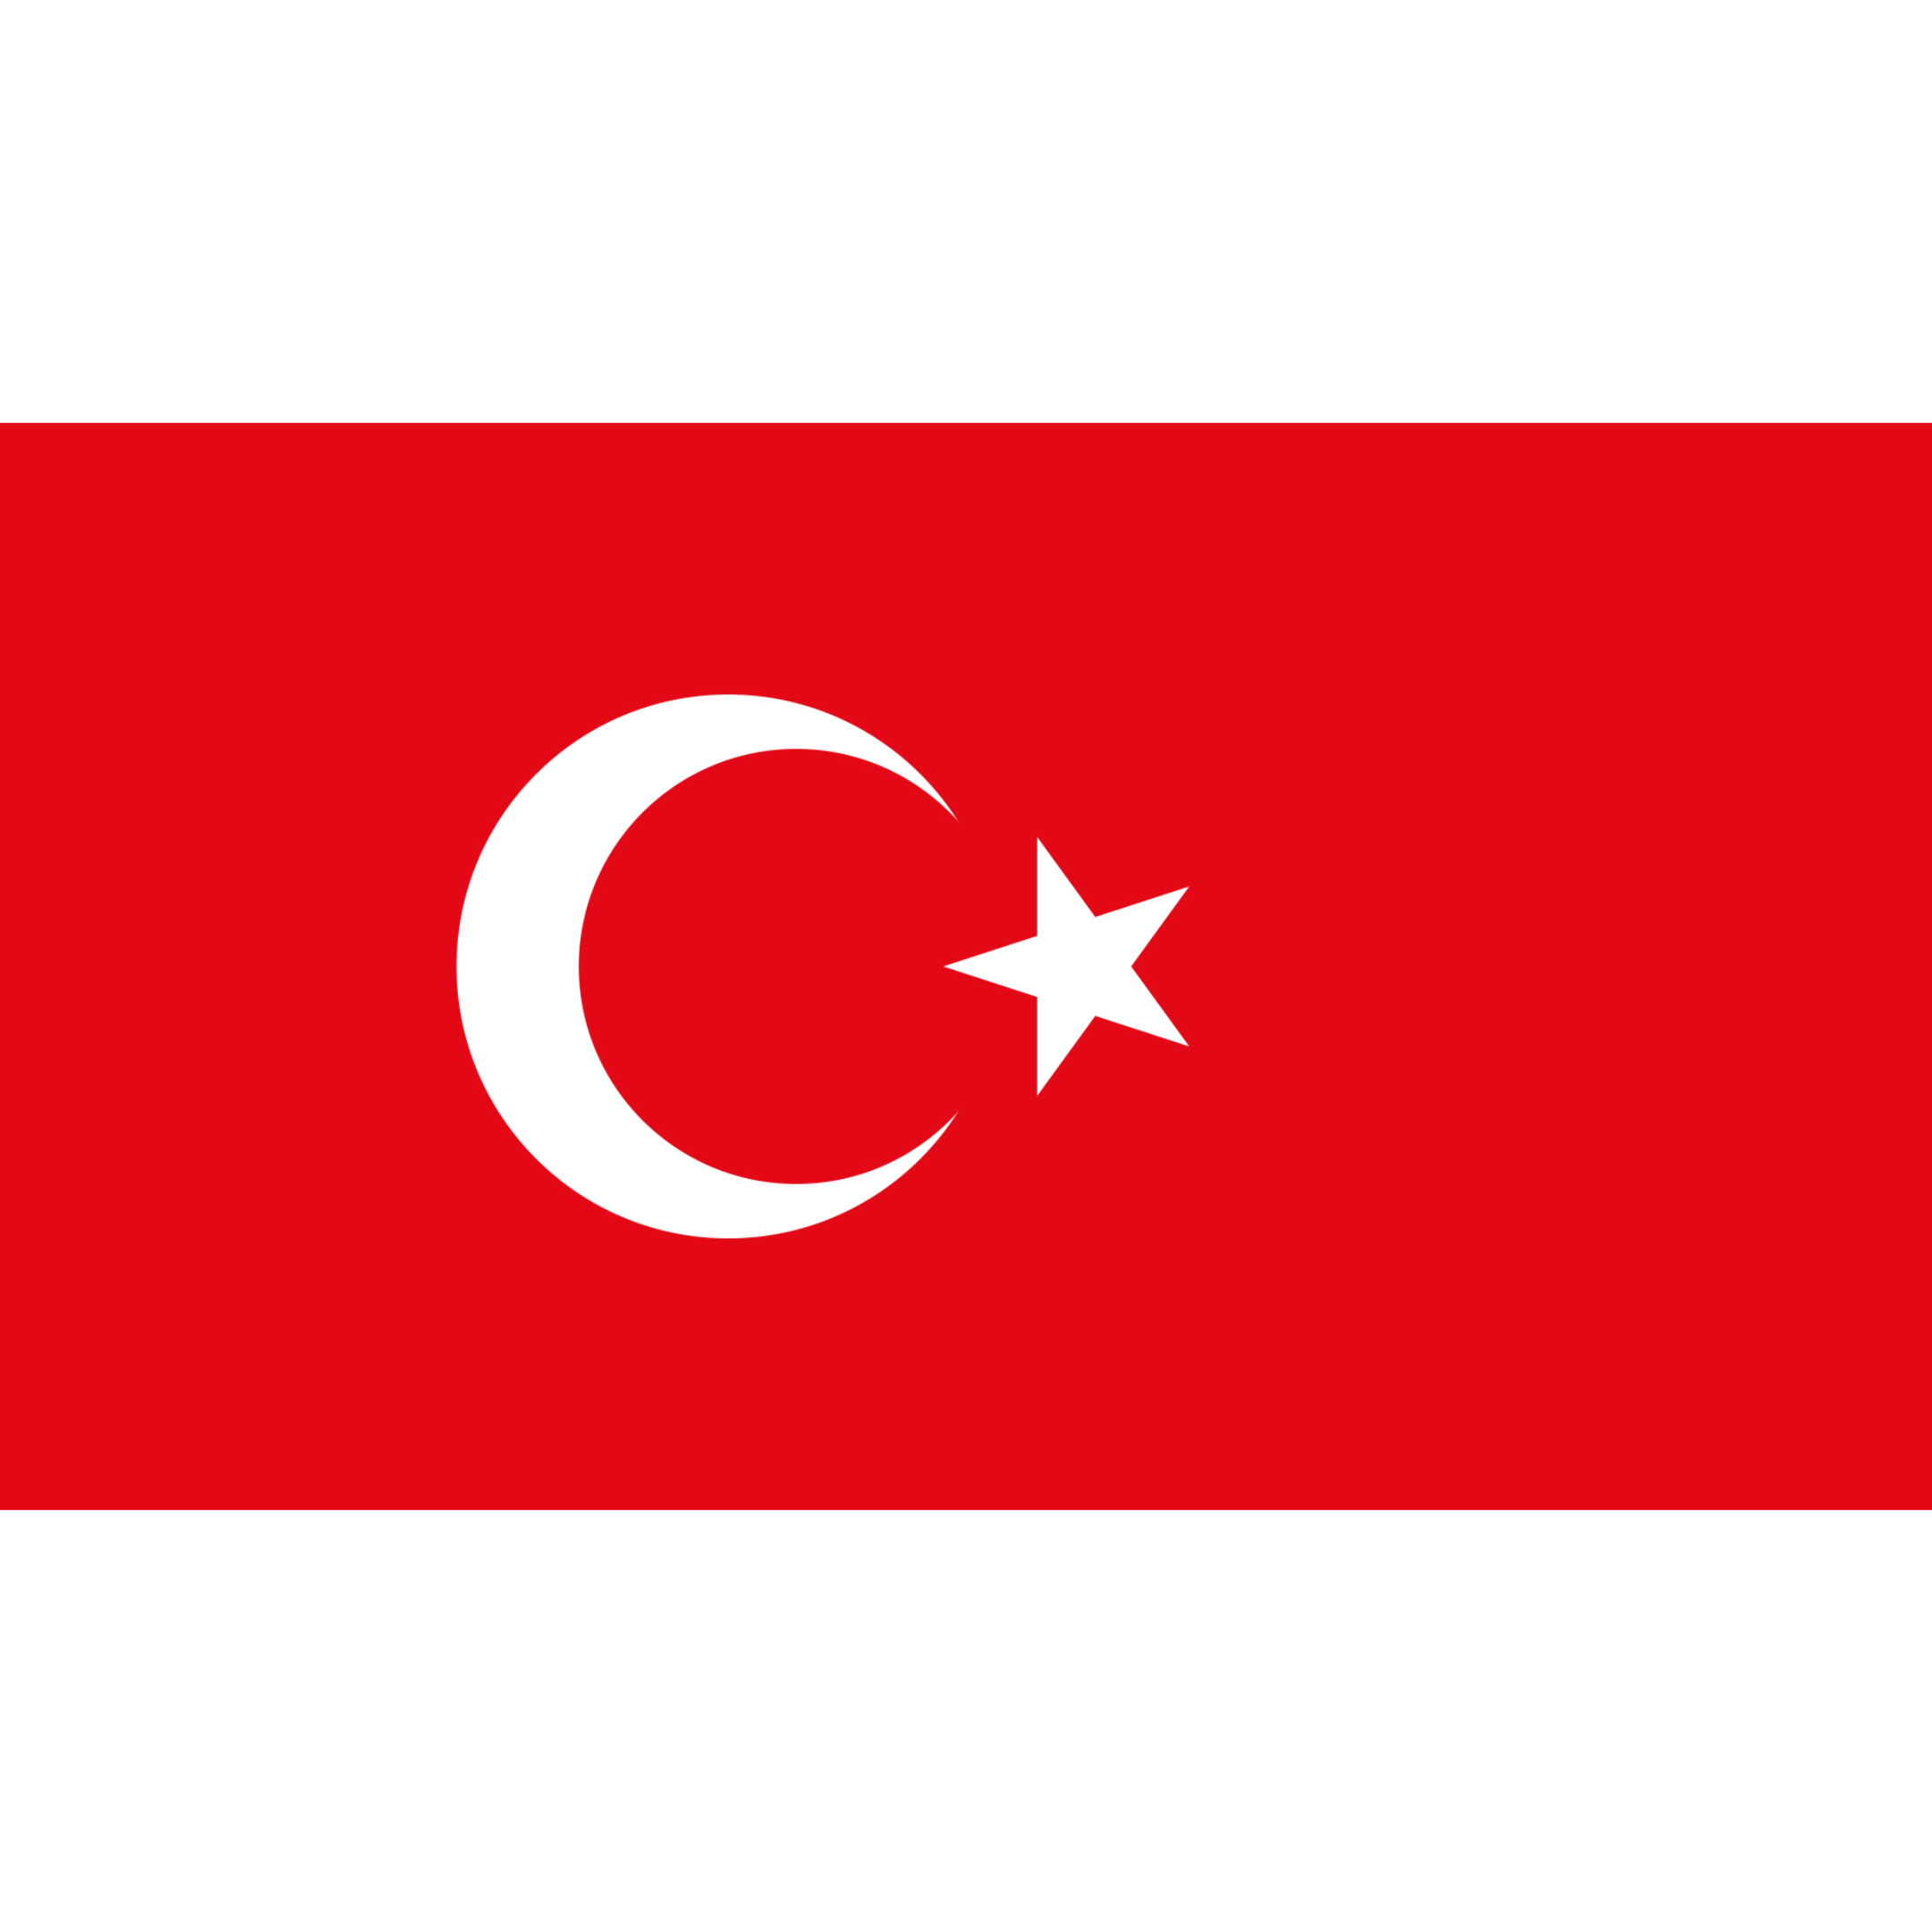 The Turkish flag has a red background with a white star and crescent in the centre.